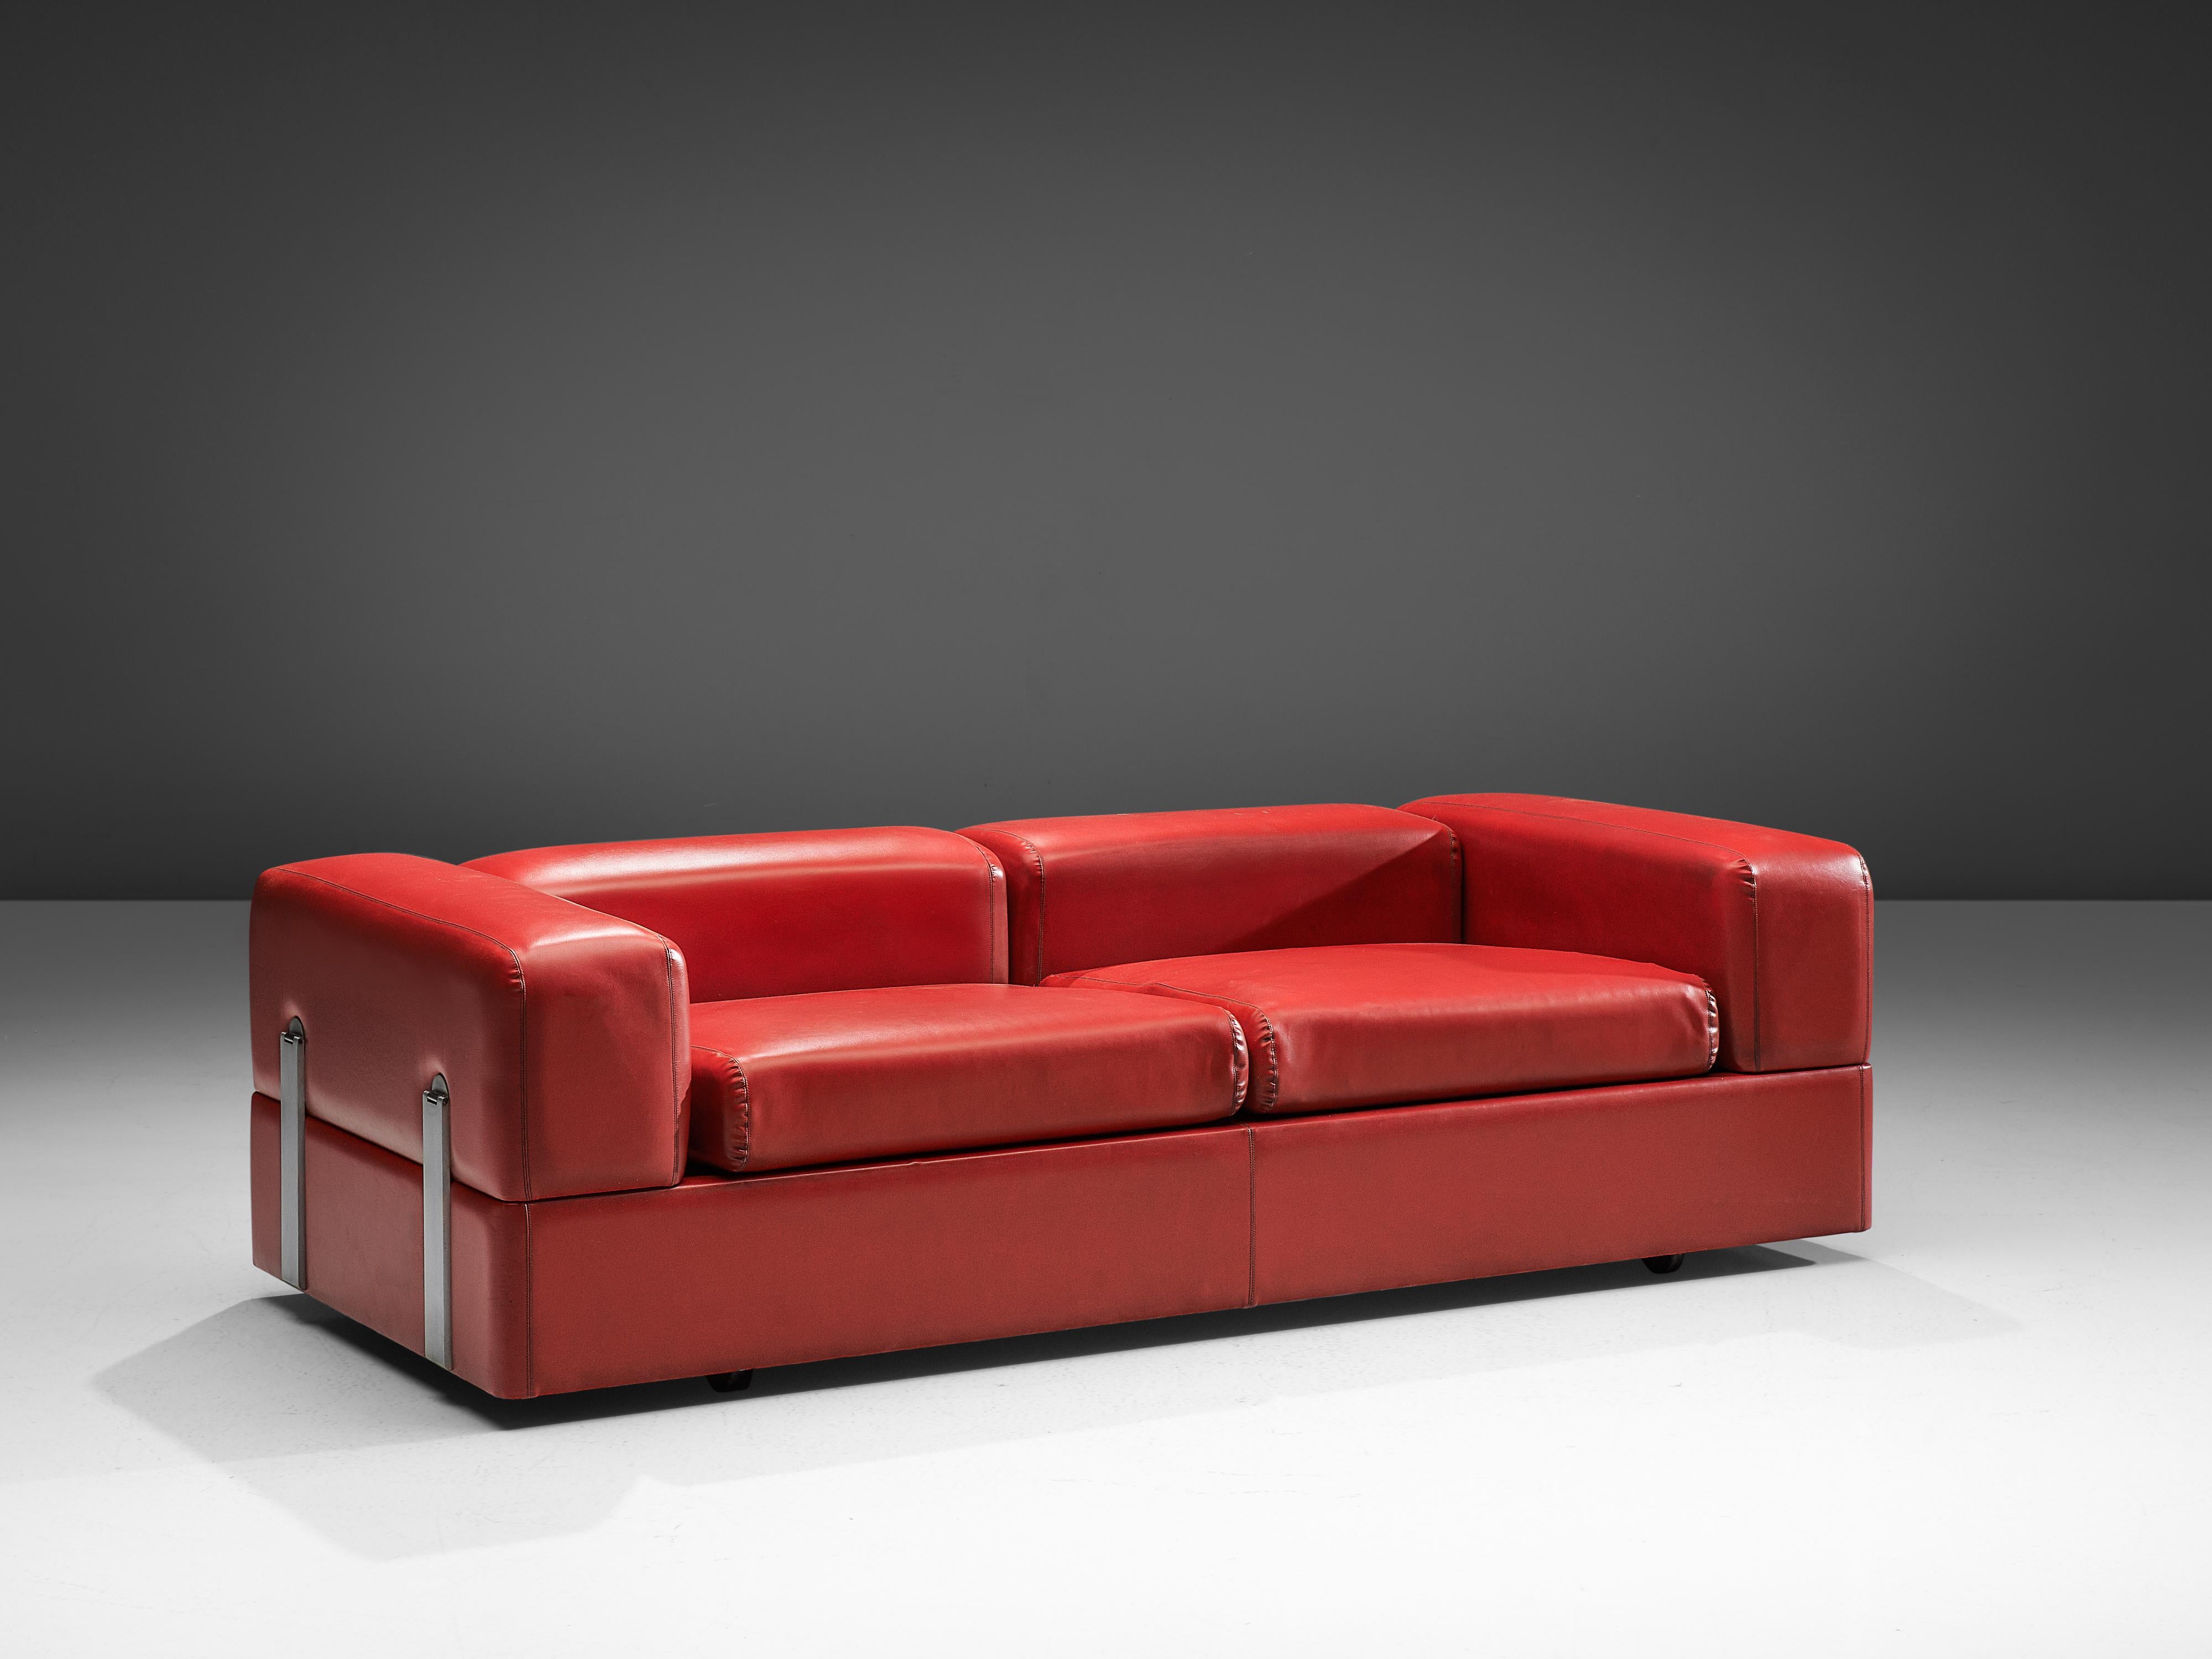 Tito Agnoli for Cinova, sofa or daybed model 711, red leatherette, steel, laminated wood, Italy, 1960s

Cubic sofa that can be transformed into a daybed by Italian designer Tito Agnoli for Cinova. The chromed steel frame displays an exquisite